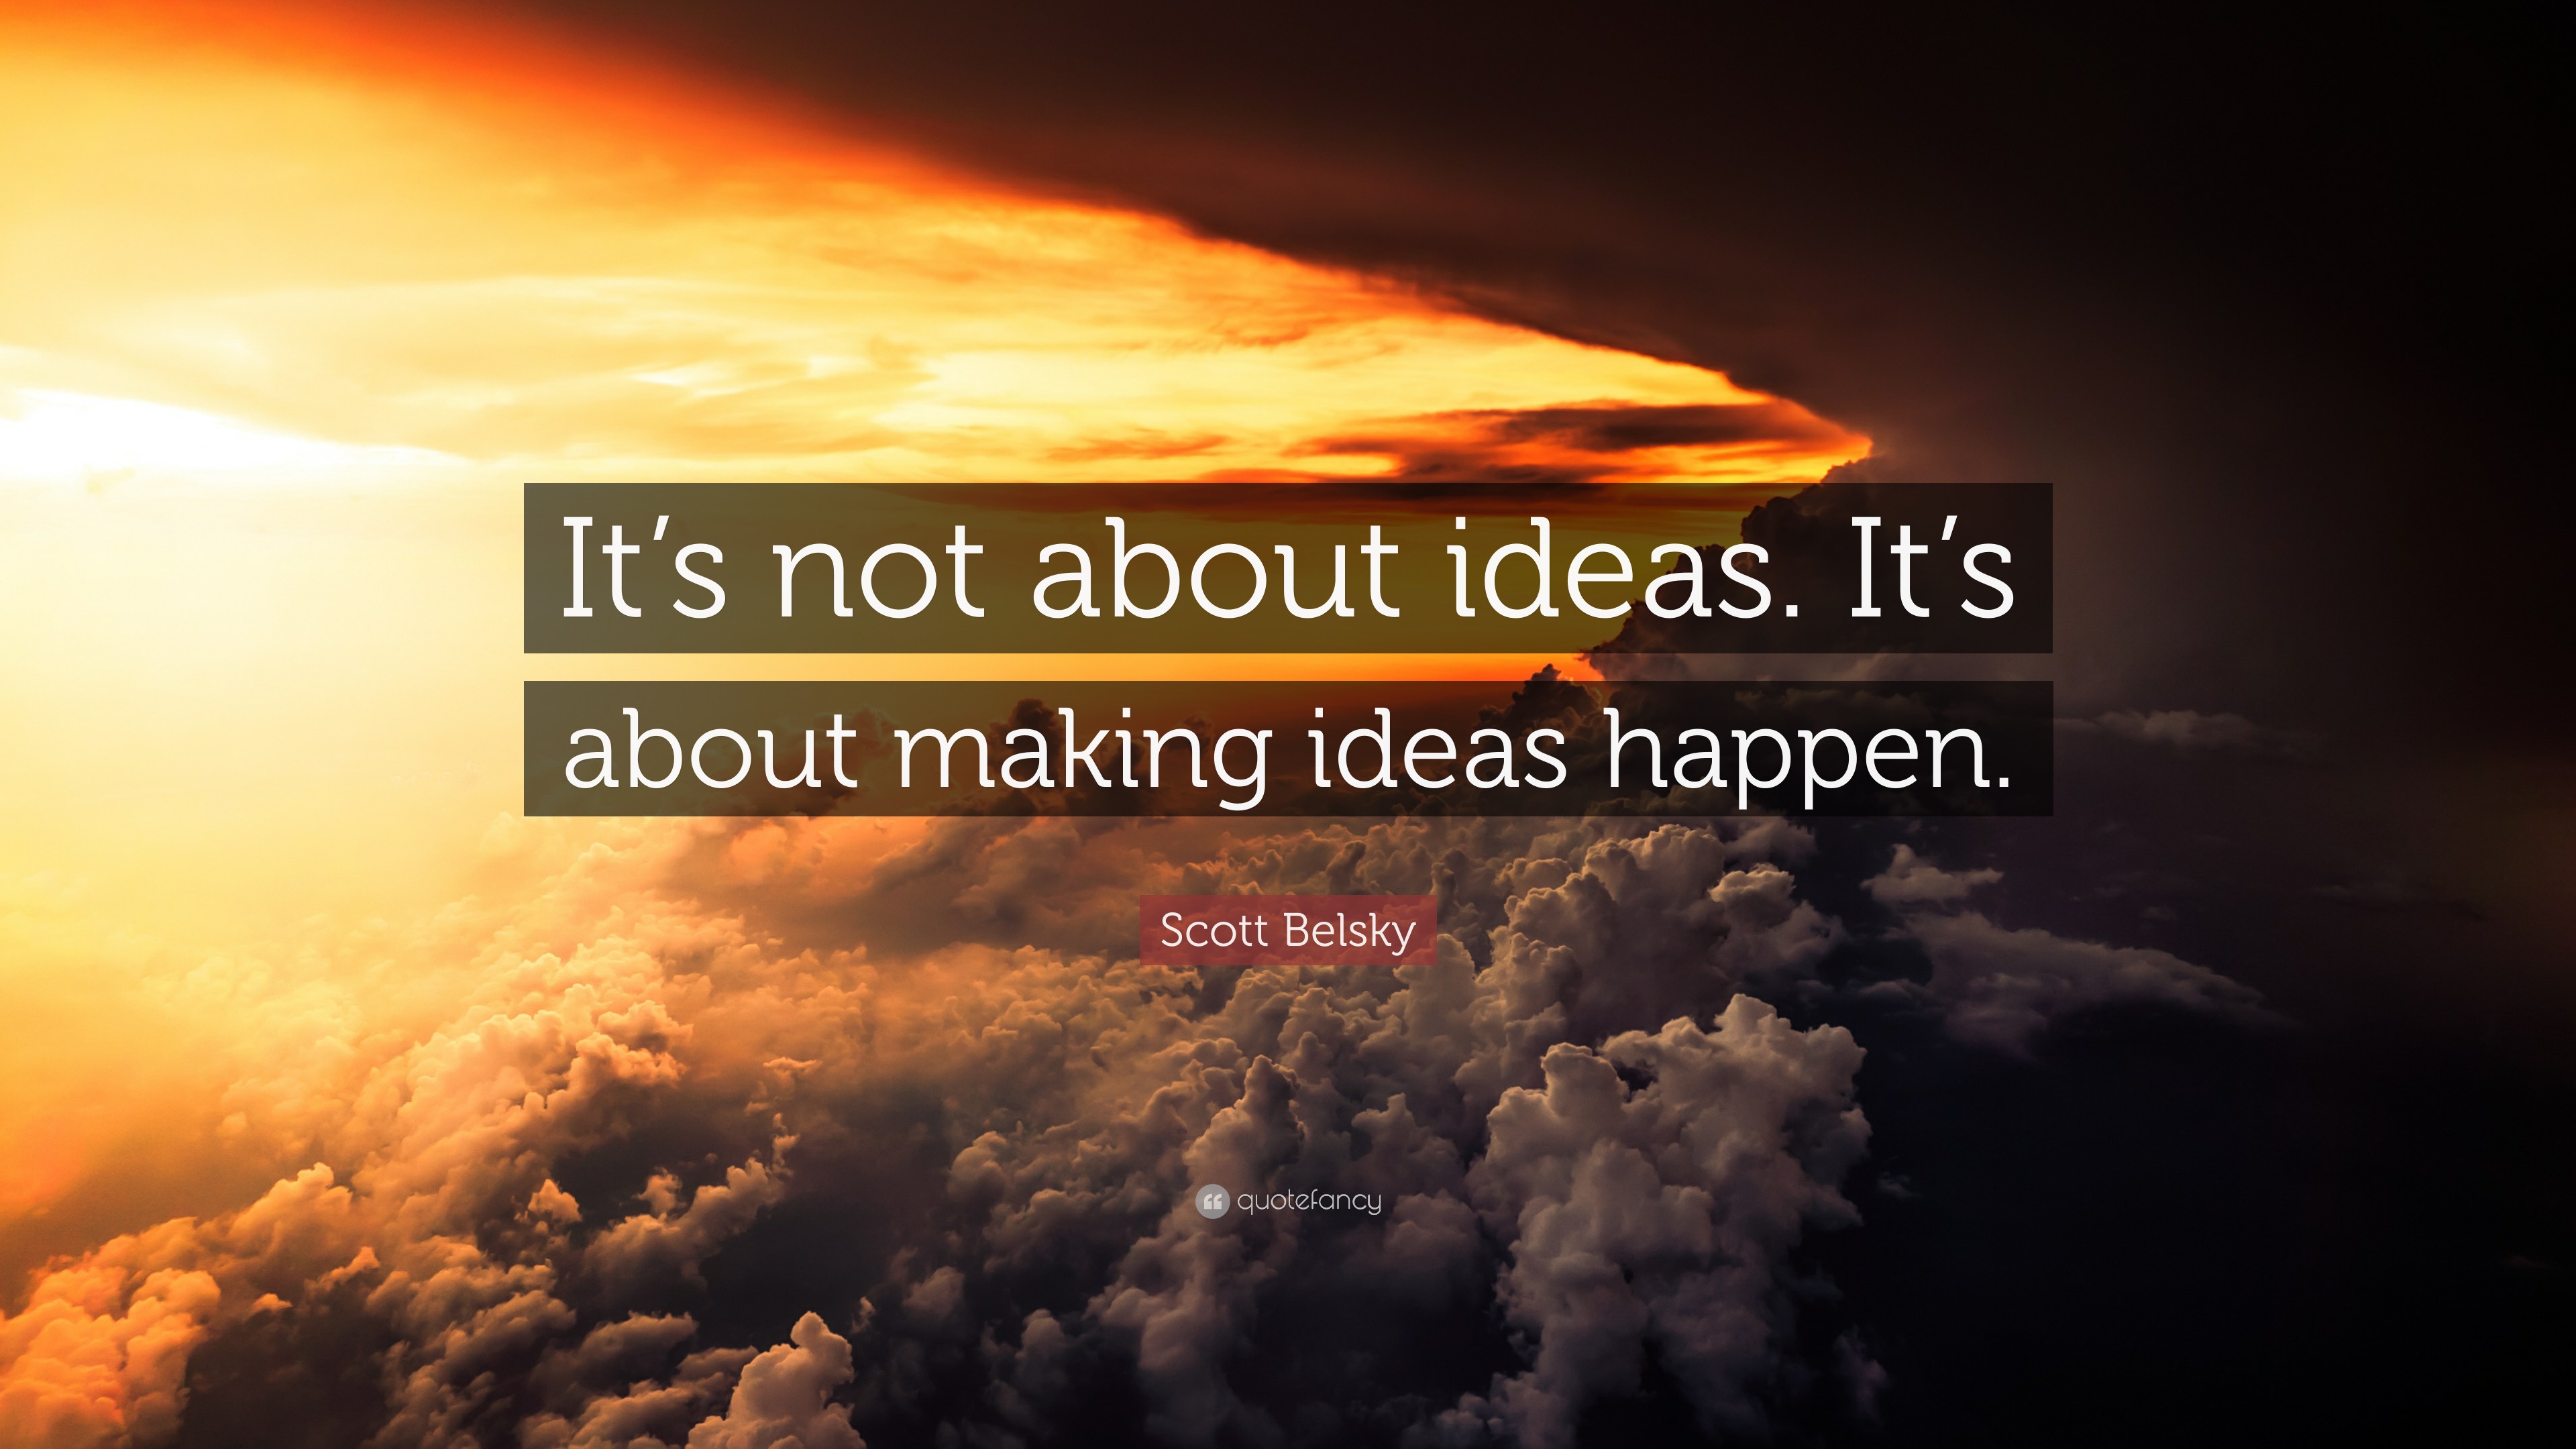 Scott Belsky Quote “its Not About Ideas Its About Making Ideas Happen”